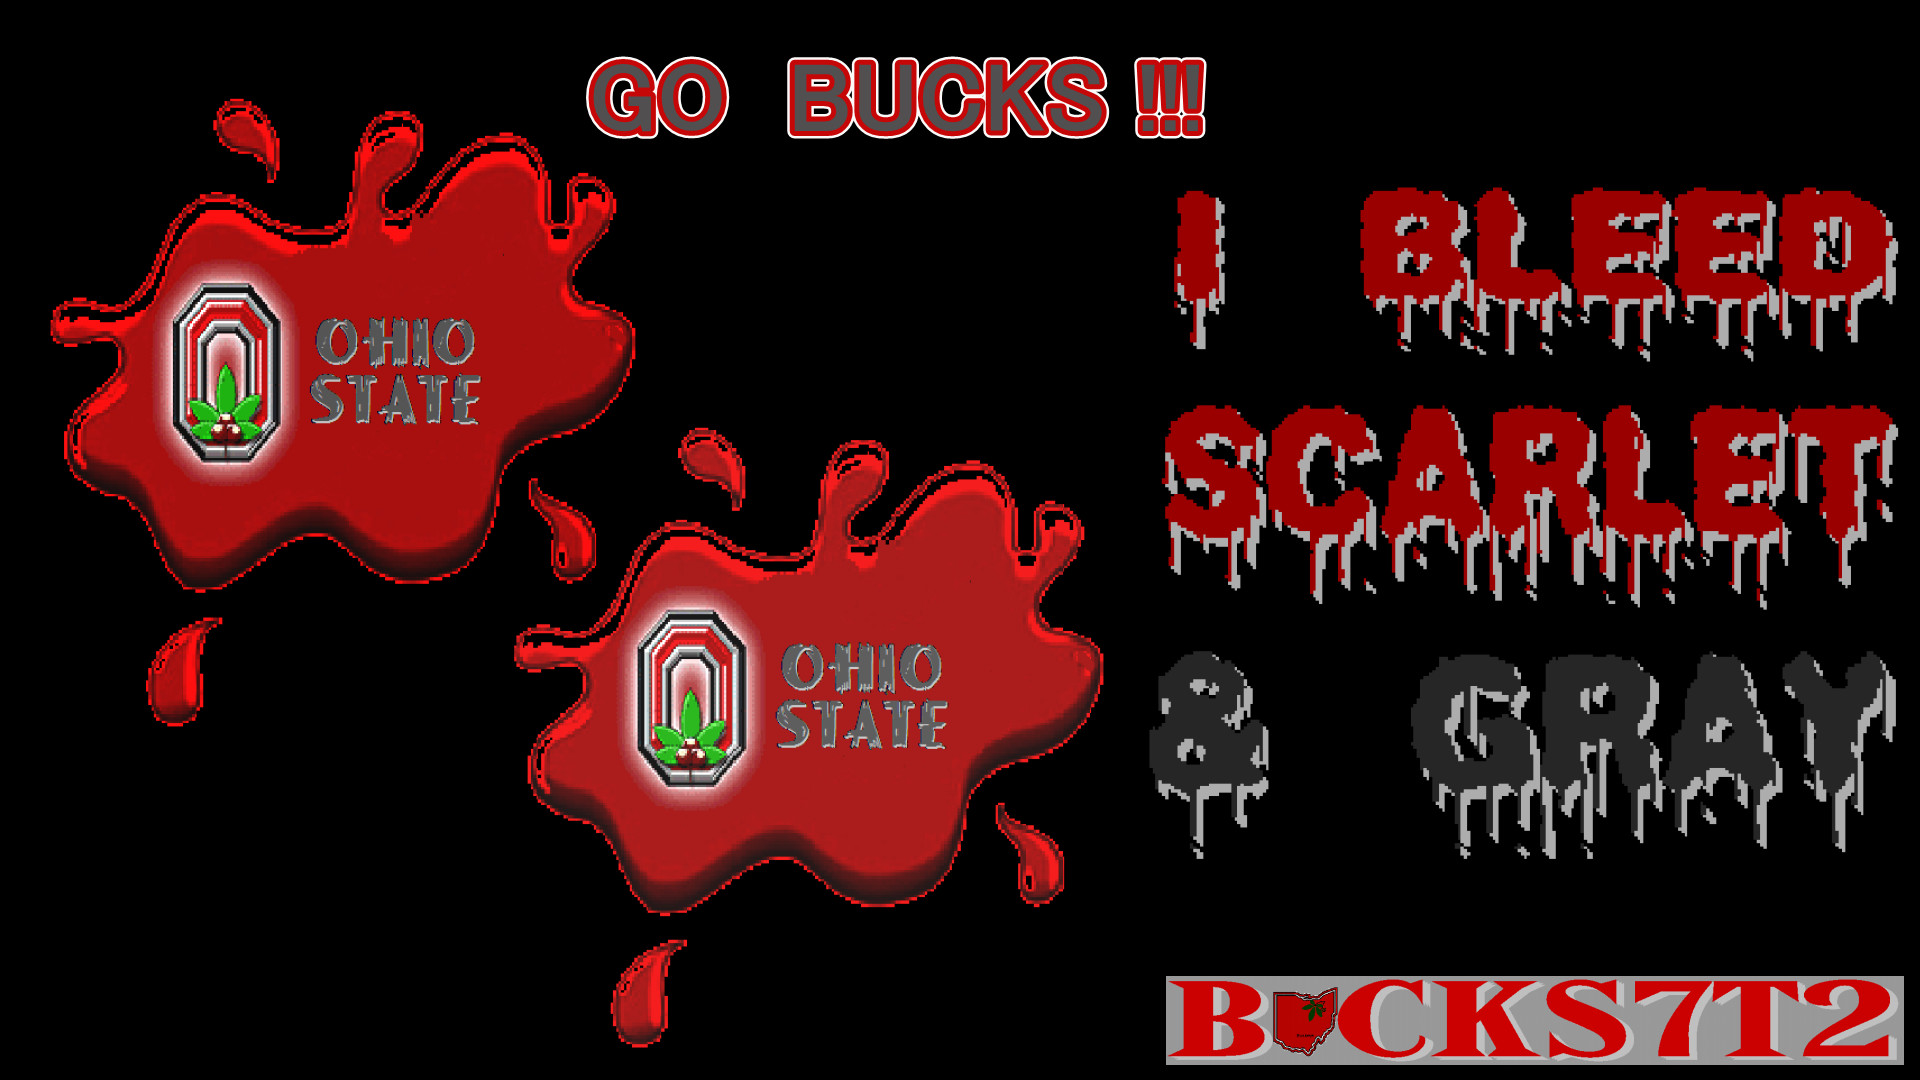 1920x1080 Ohio State Buckeyes images I BLEED SCARLET & GRAY HD wallpaper and  background photos